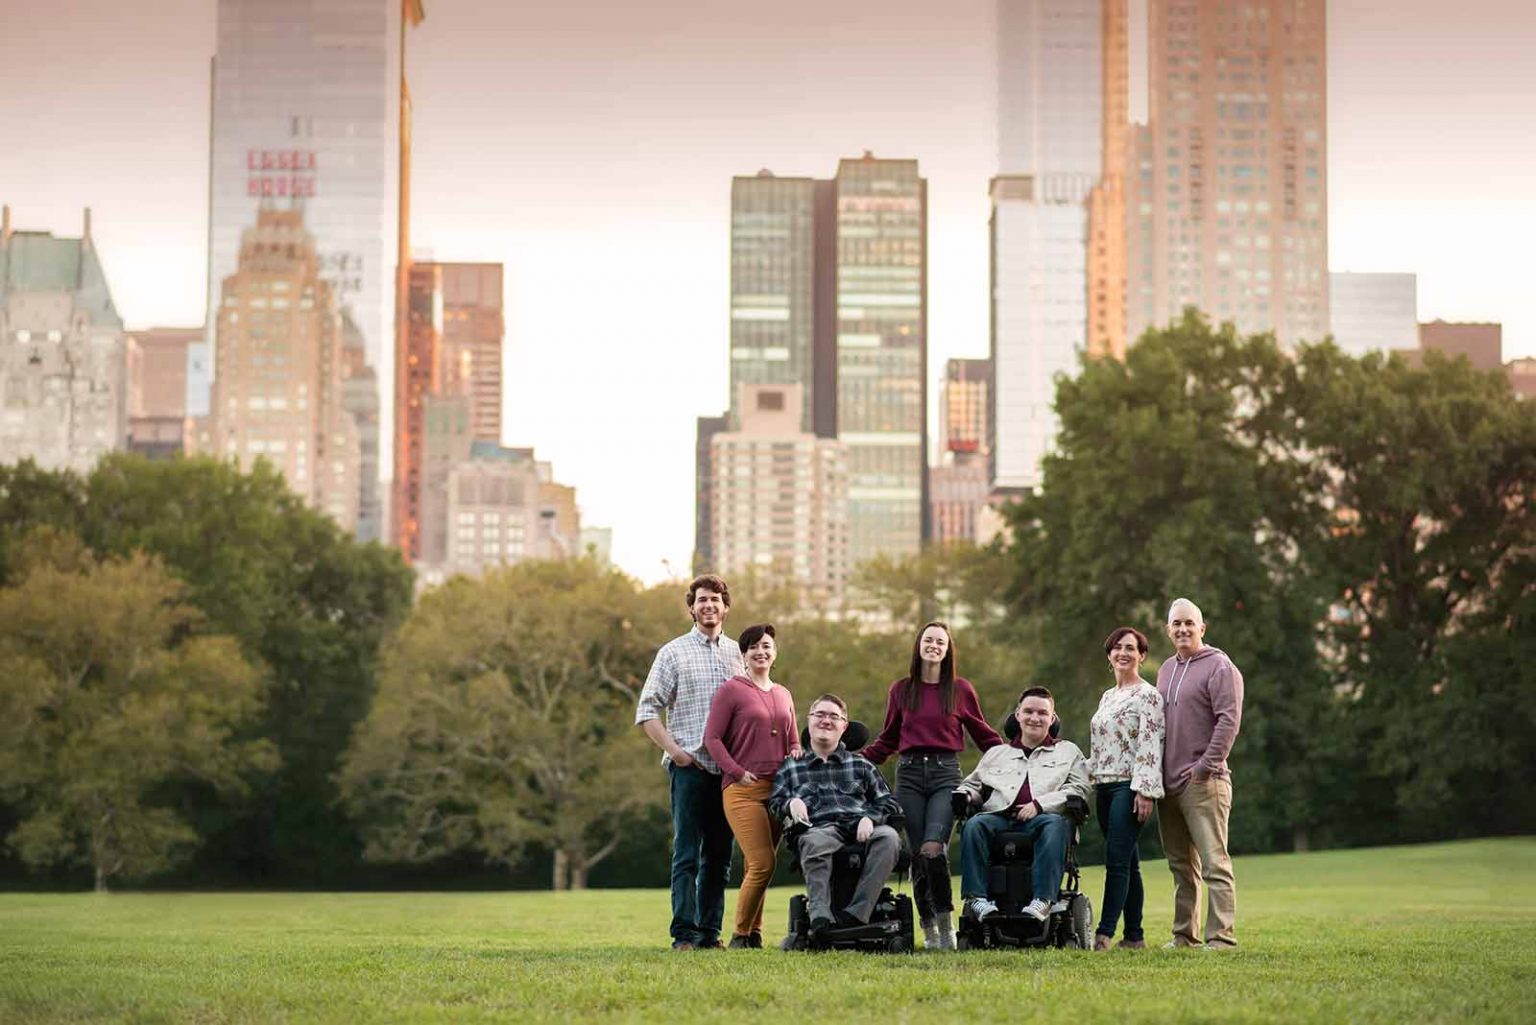 Portrait of a family with their teenage children taken in New York City's Central Park